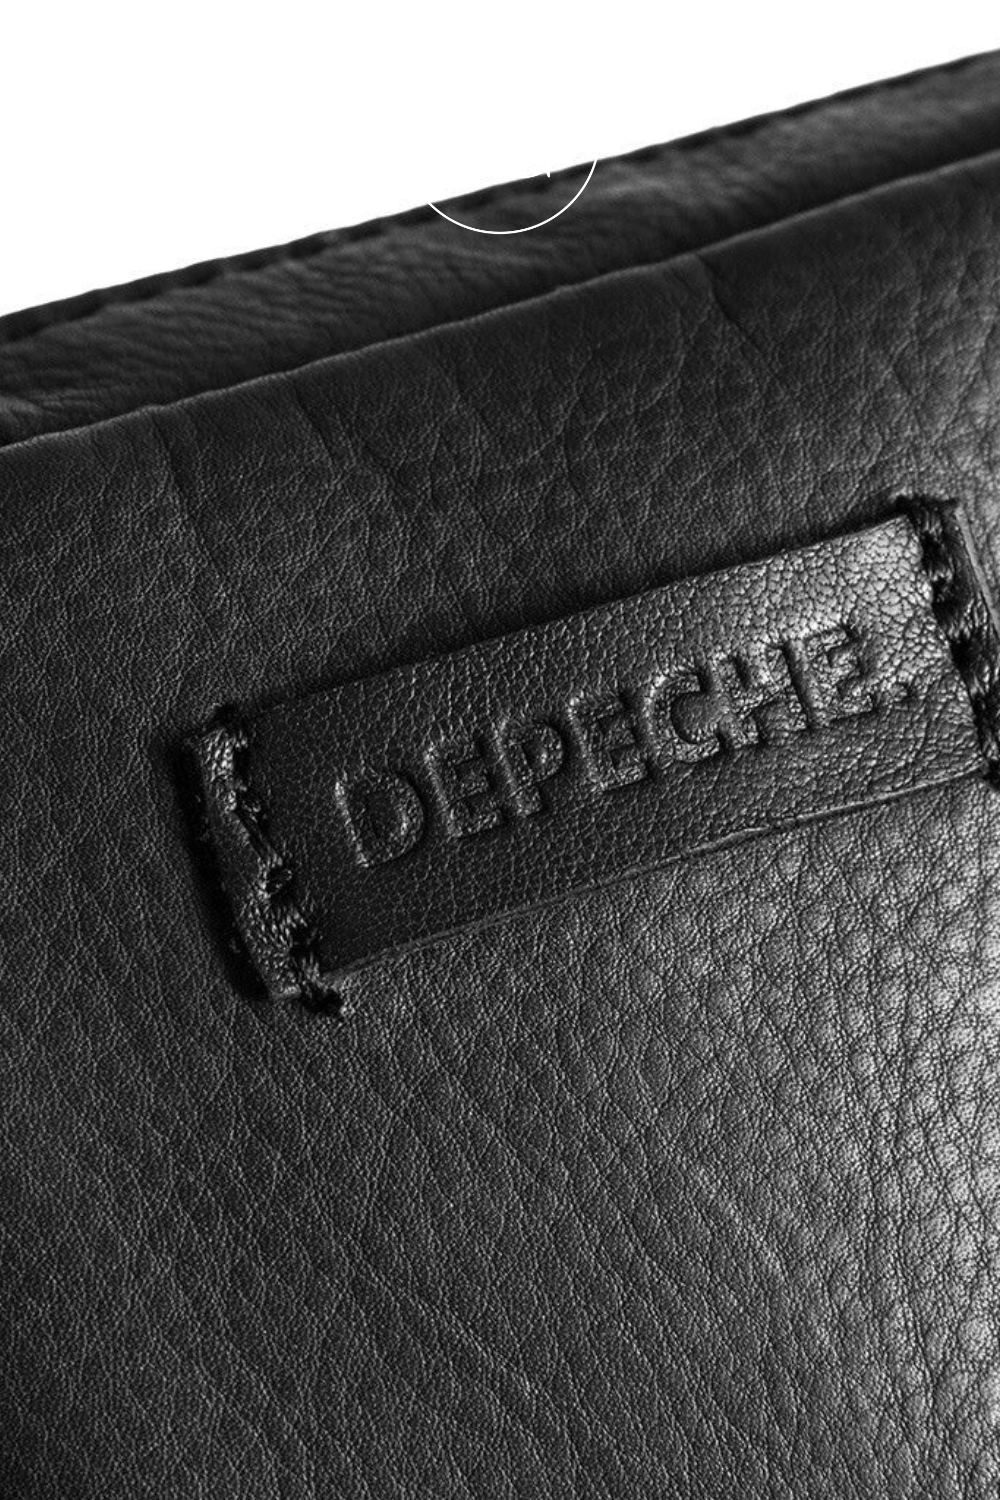 DEPECHE 15700 BLACK LEATHER PHONEBAG WITH GOLD HARDWARE AND SMALL FRONT POCKET